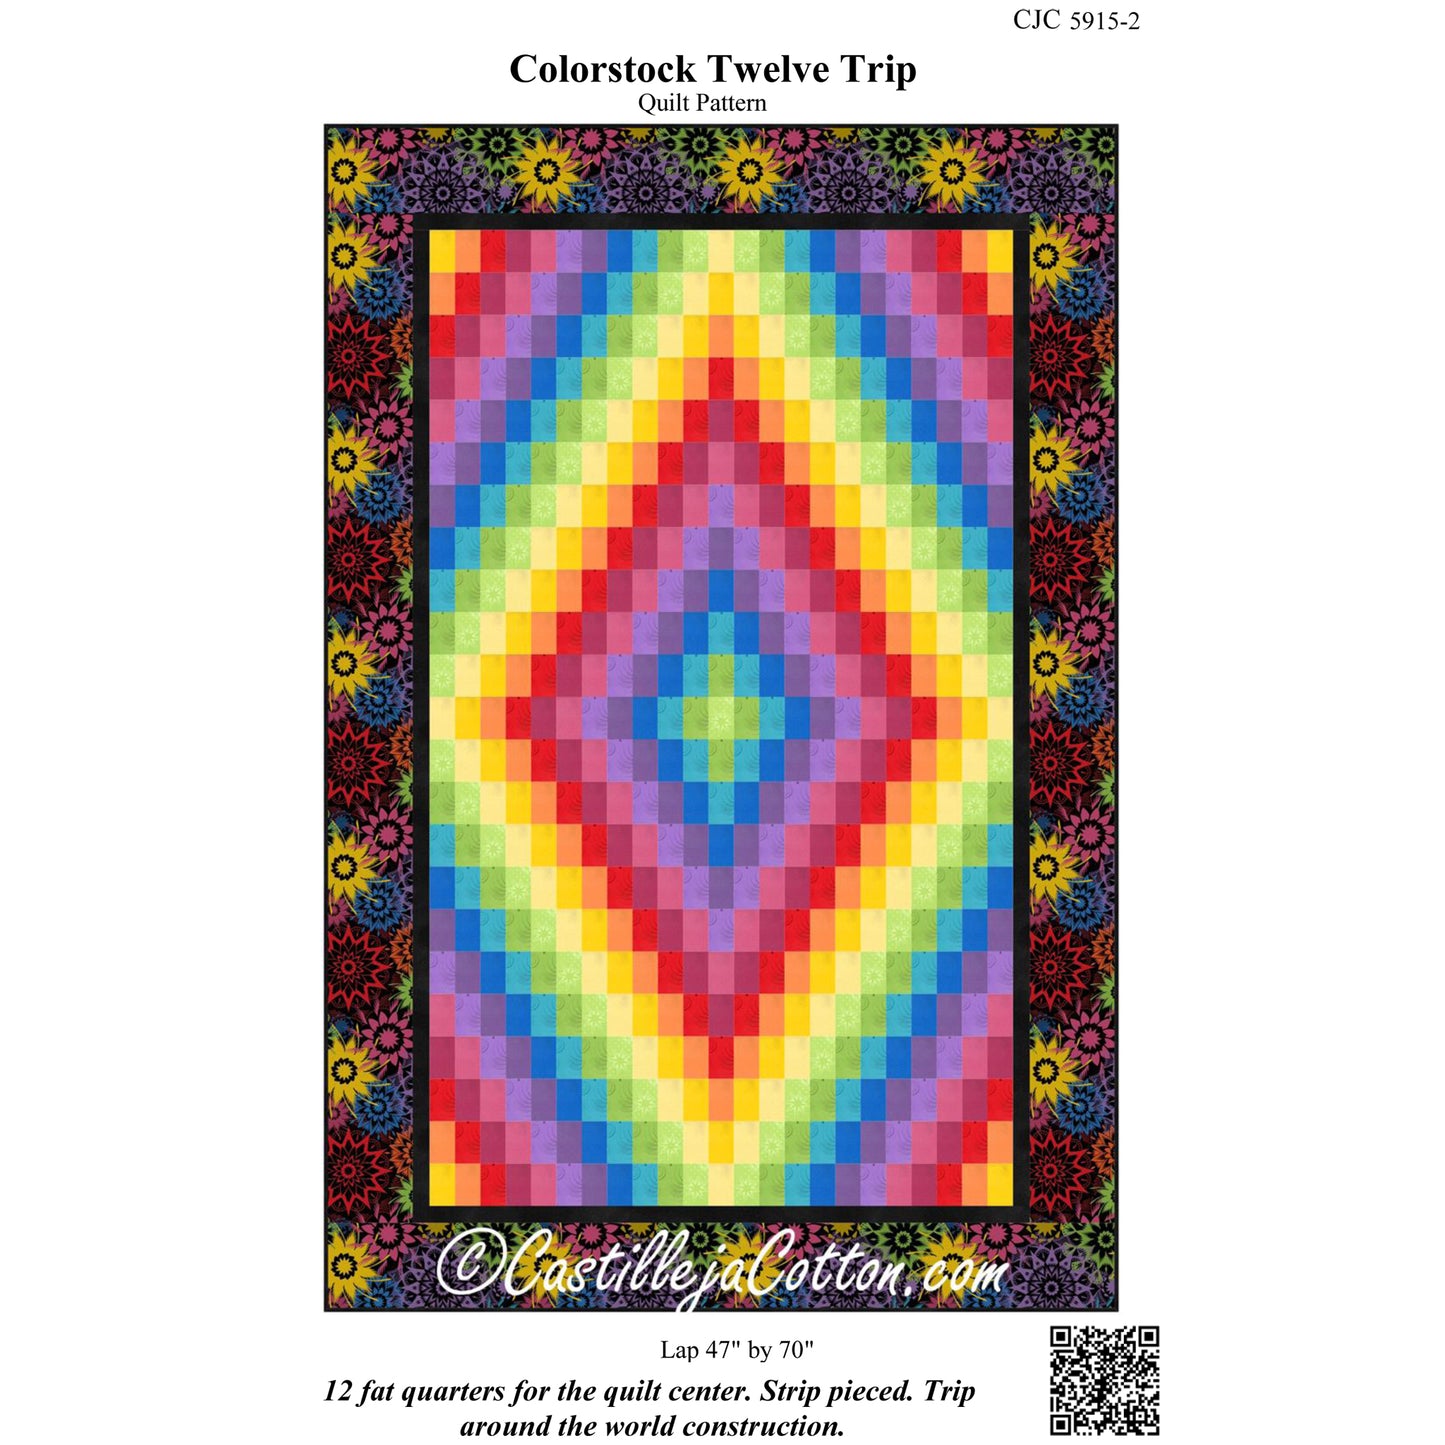 Cover image of pattern for Colorstock Twelve Trip Quilt.